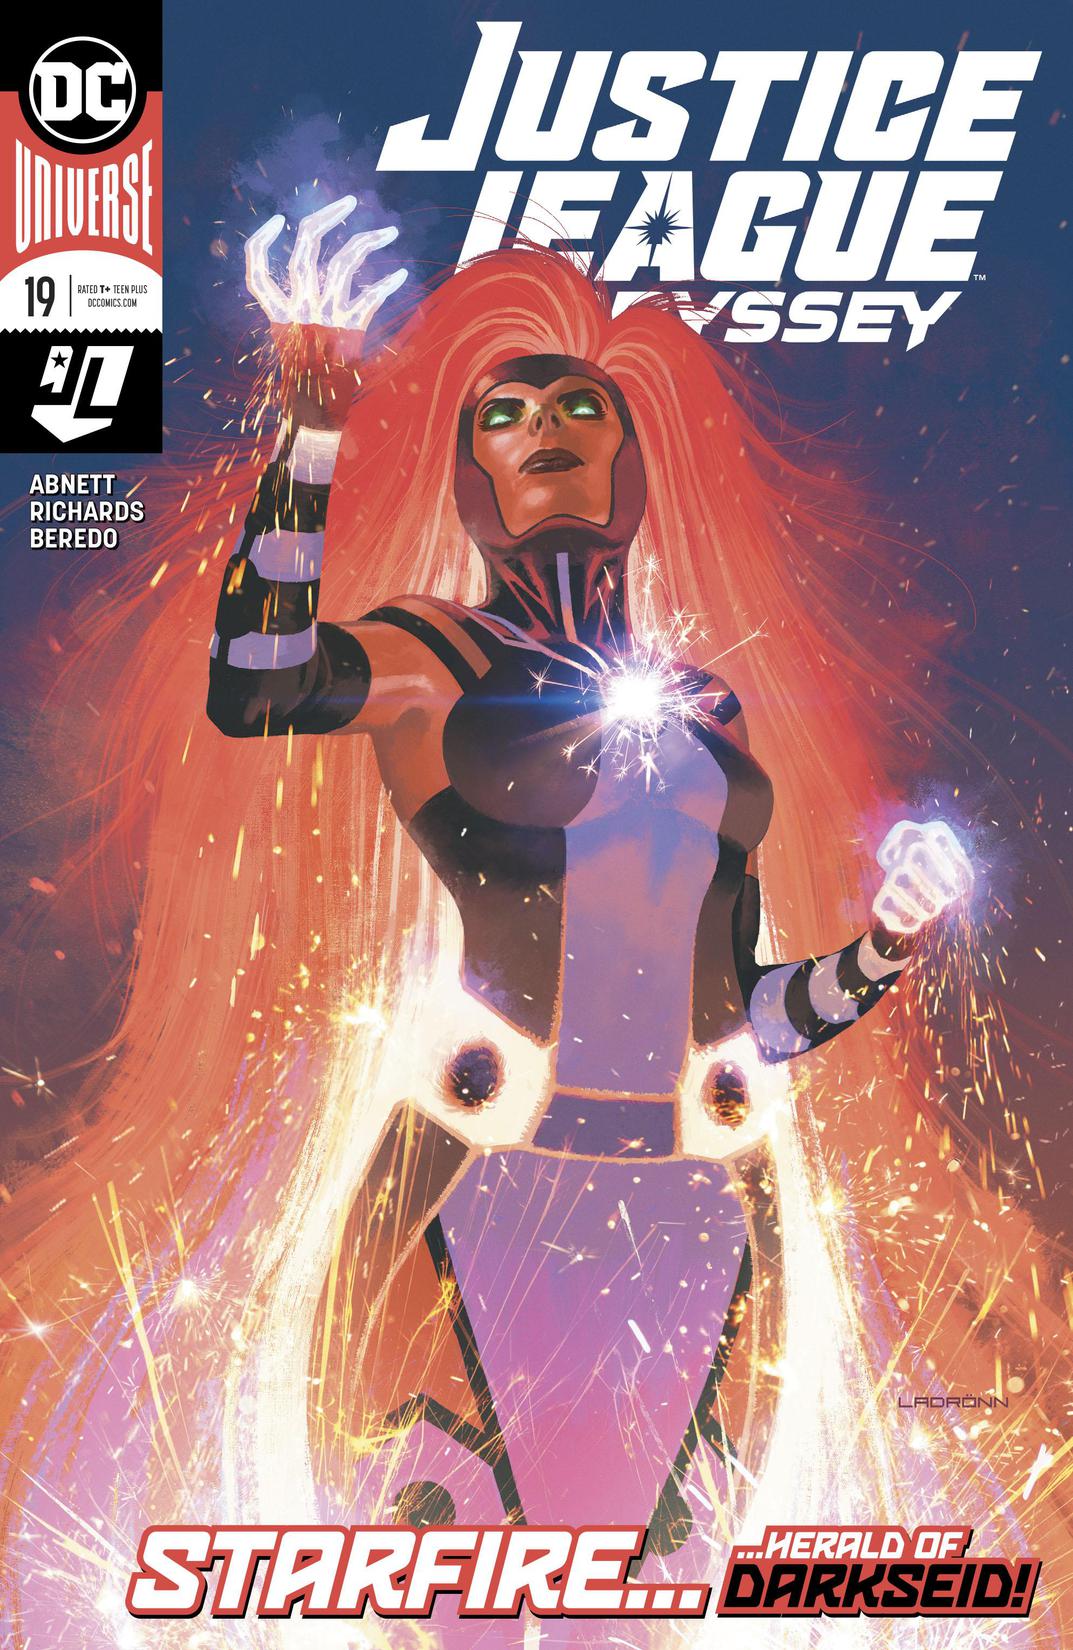 Justice League Odyssey #19 preview images